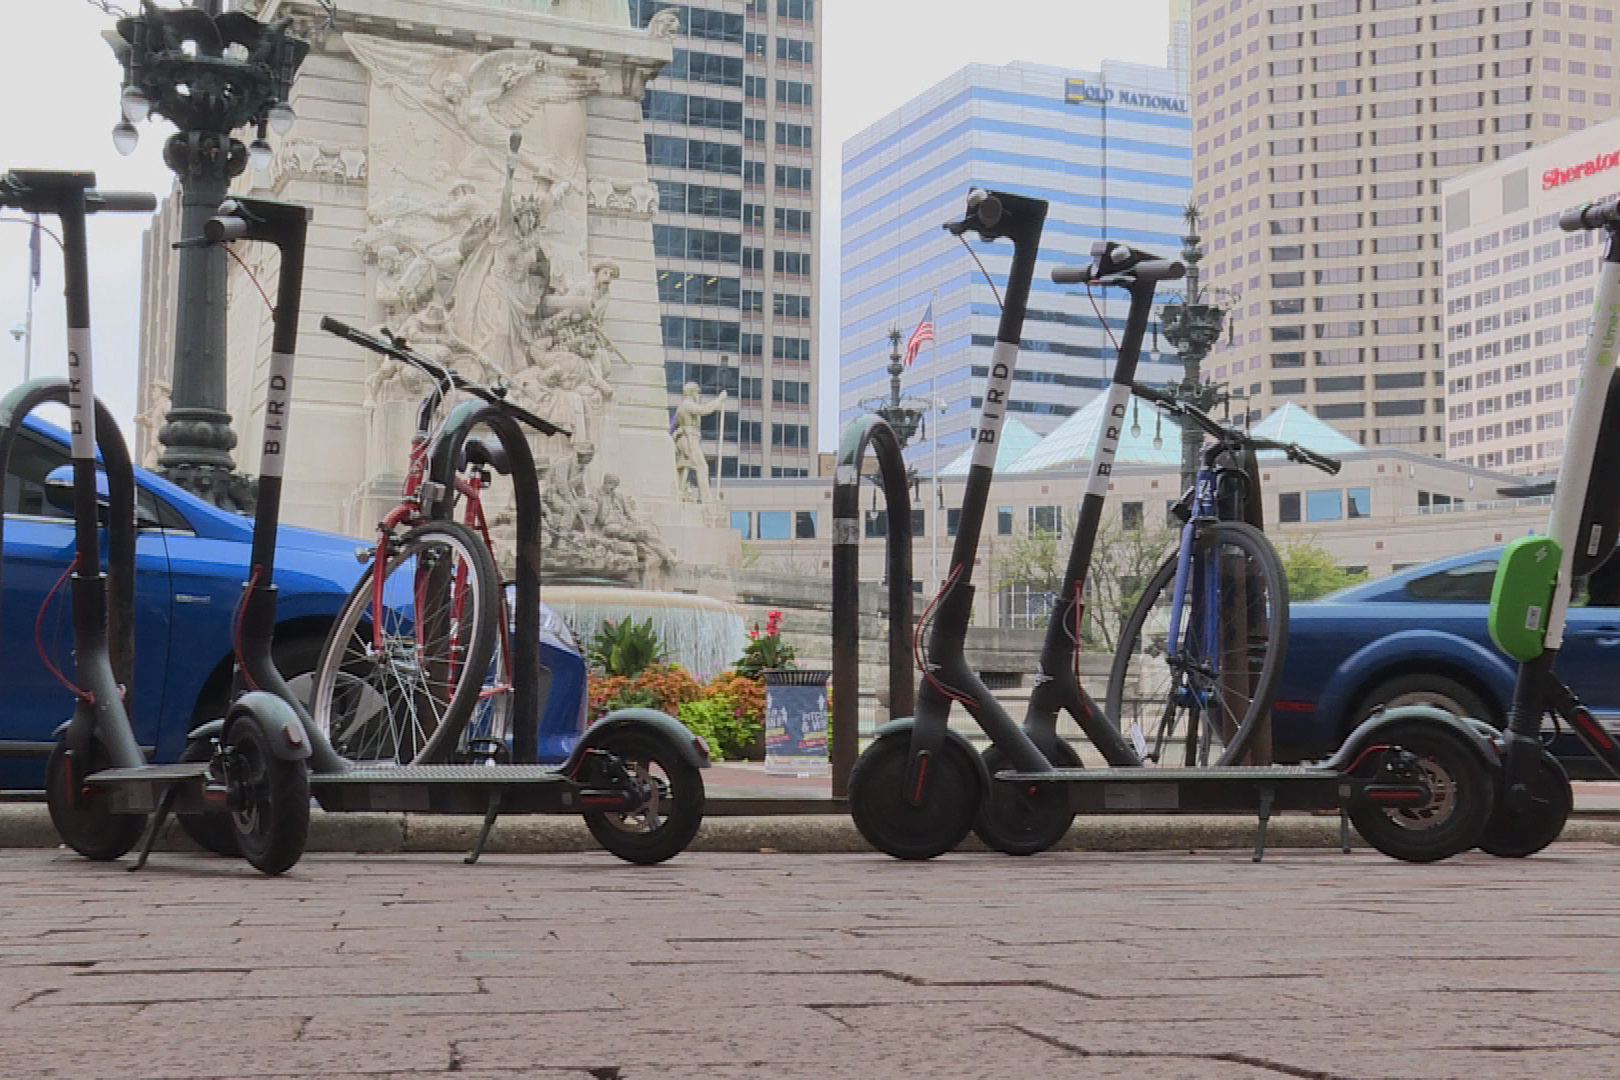 A cluster of electric rental scooters near Monument Circle in Indianapolis